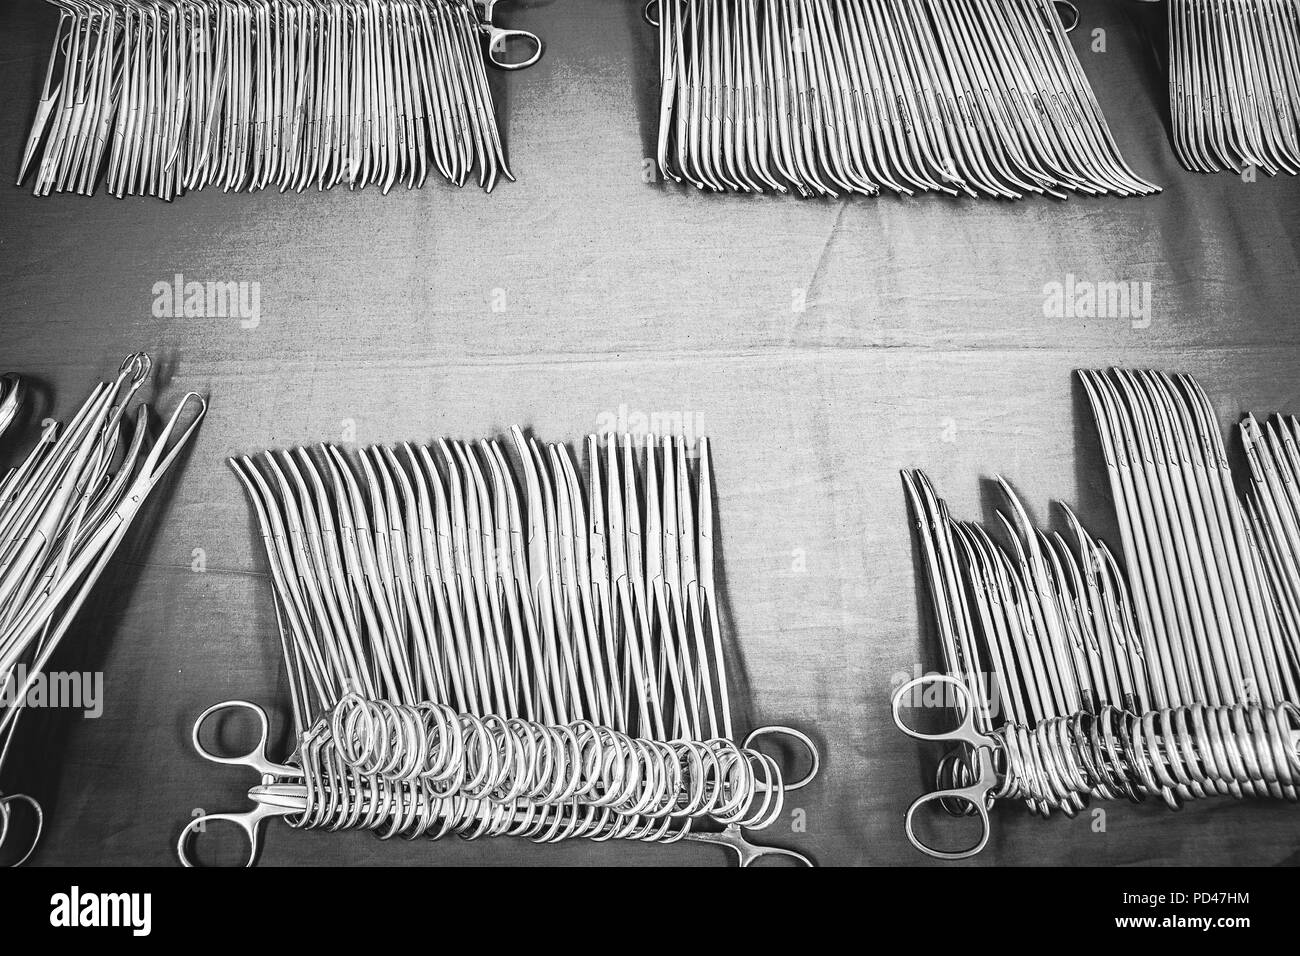 Sterile surgical instruments on the table. Top view Stock Photo